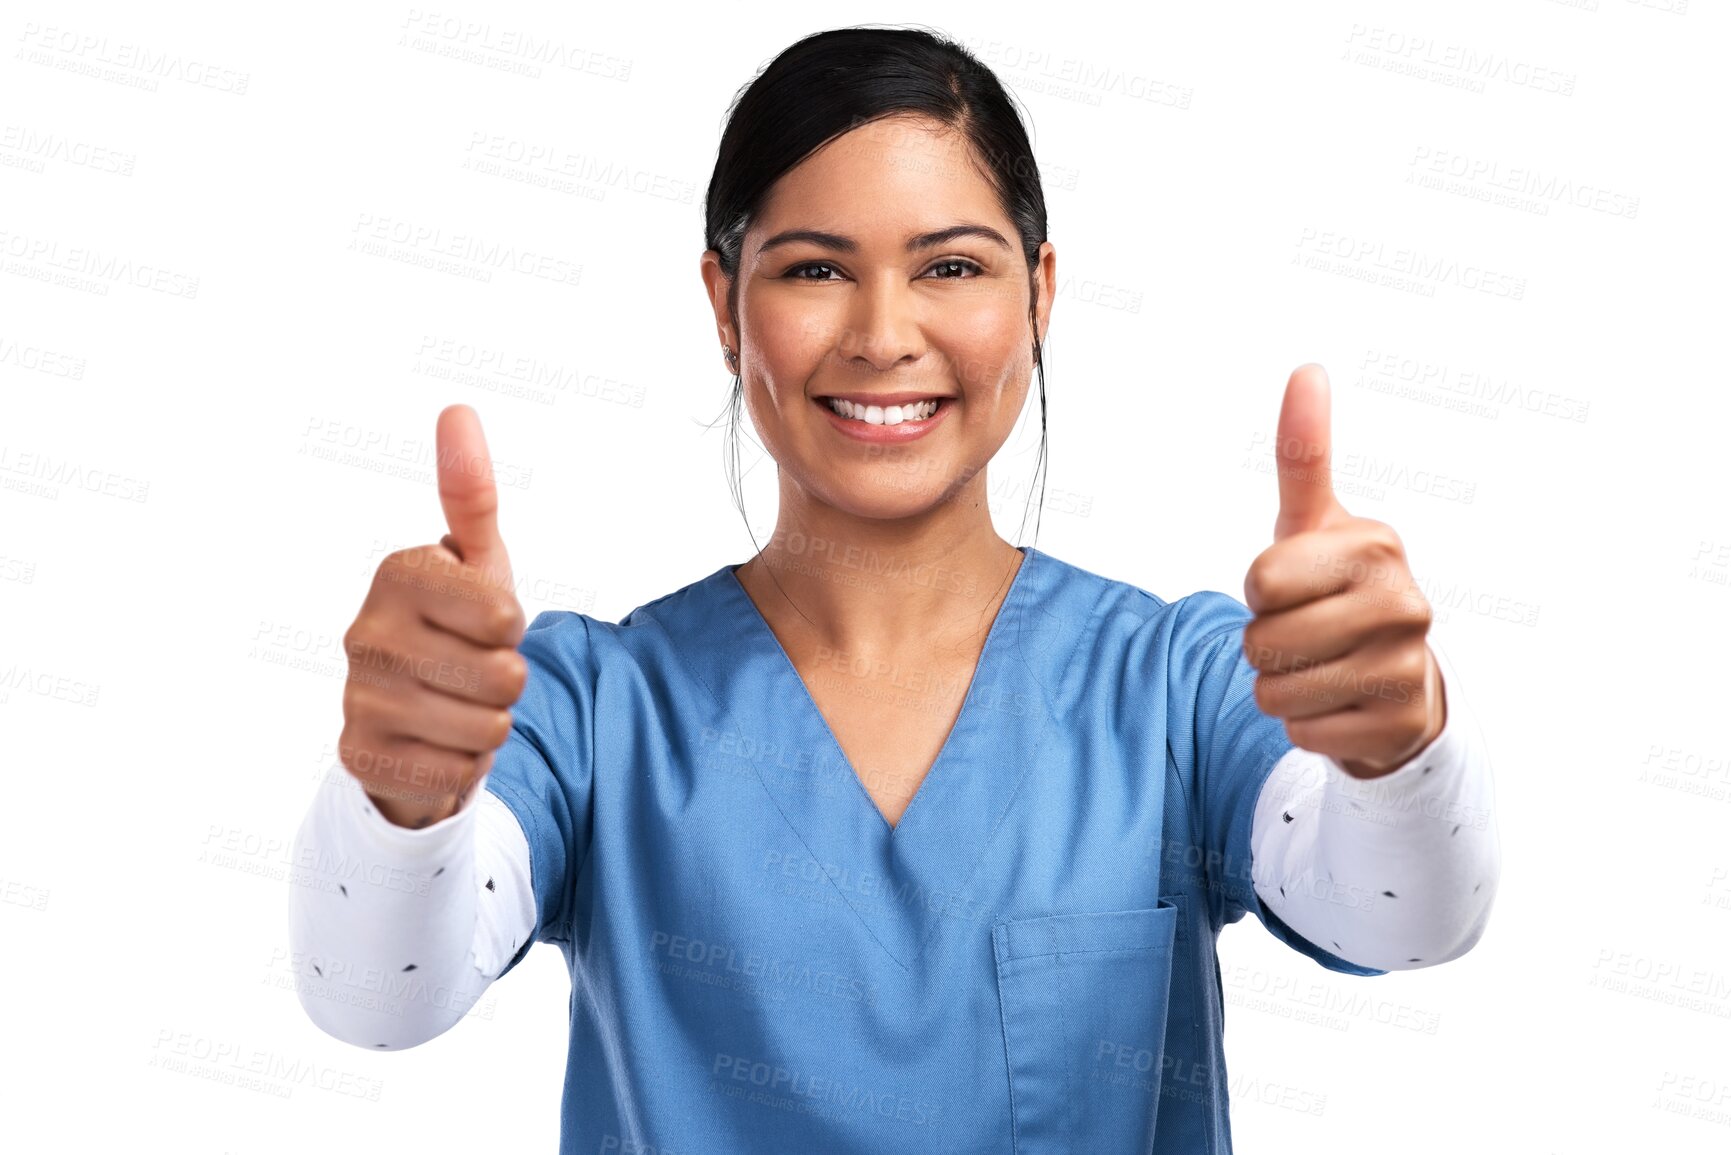 Buy stock photo Portrait, thumbs up and thank you with a nurse woman isolated on a transparent background for healthcare. Medical, motivation and support with a young medicine professional saying yes or like on PNG